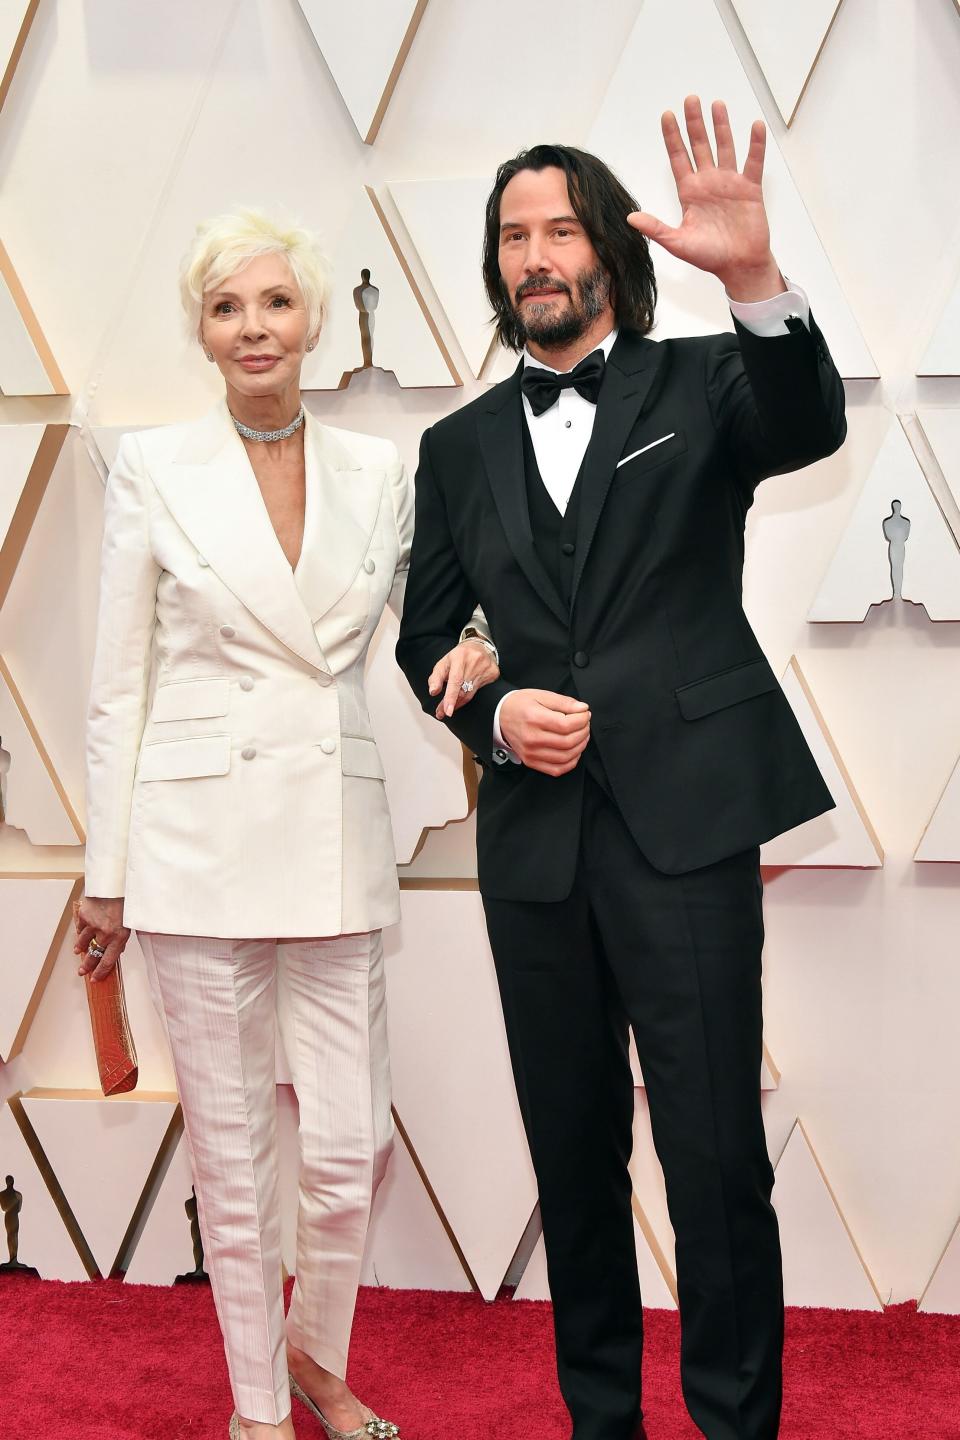 Patricia Taylor and Keanu Reeves attend the 92nd Annual Academy Awards at Hollywood and Highland on Feb. 9 in Hollywood, California. (Photo: Amy Sussman via Getty Images)